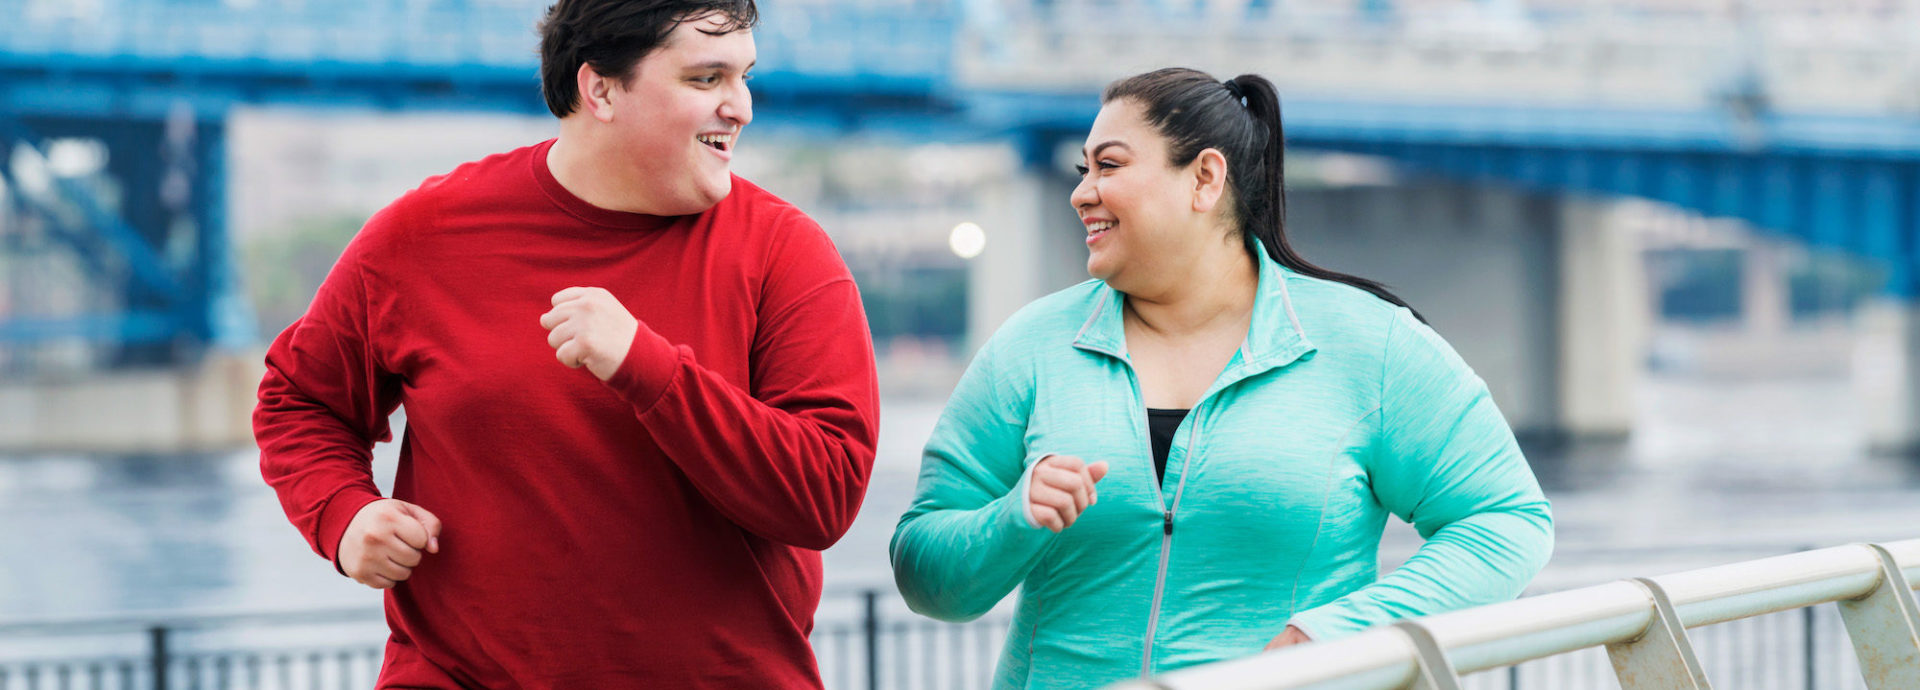 Proven programs that increase physical activity and improve diets among young adults can help reverse obesity’s impacts on health in later life.